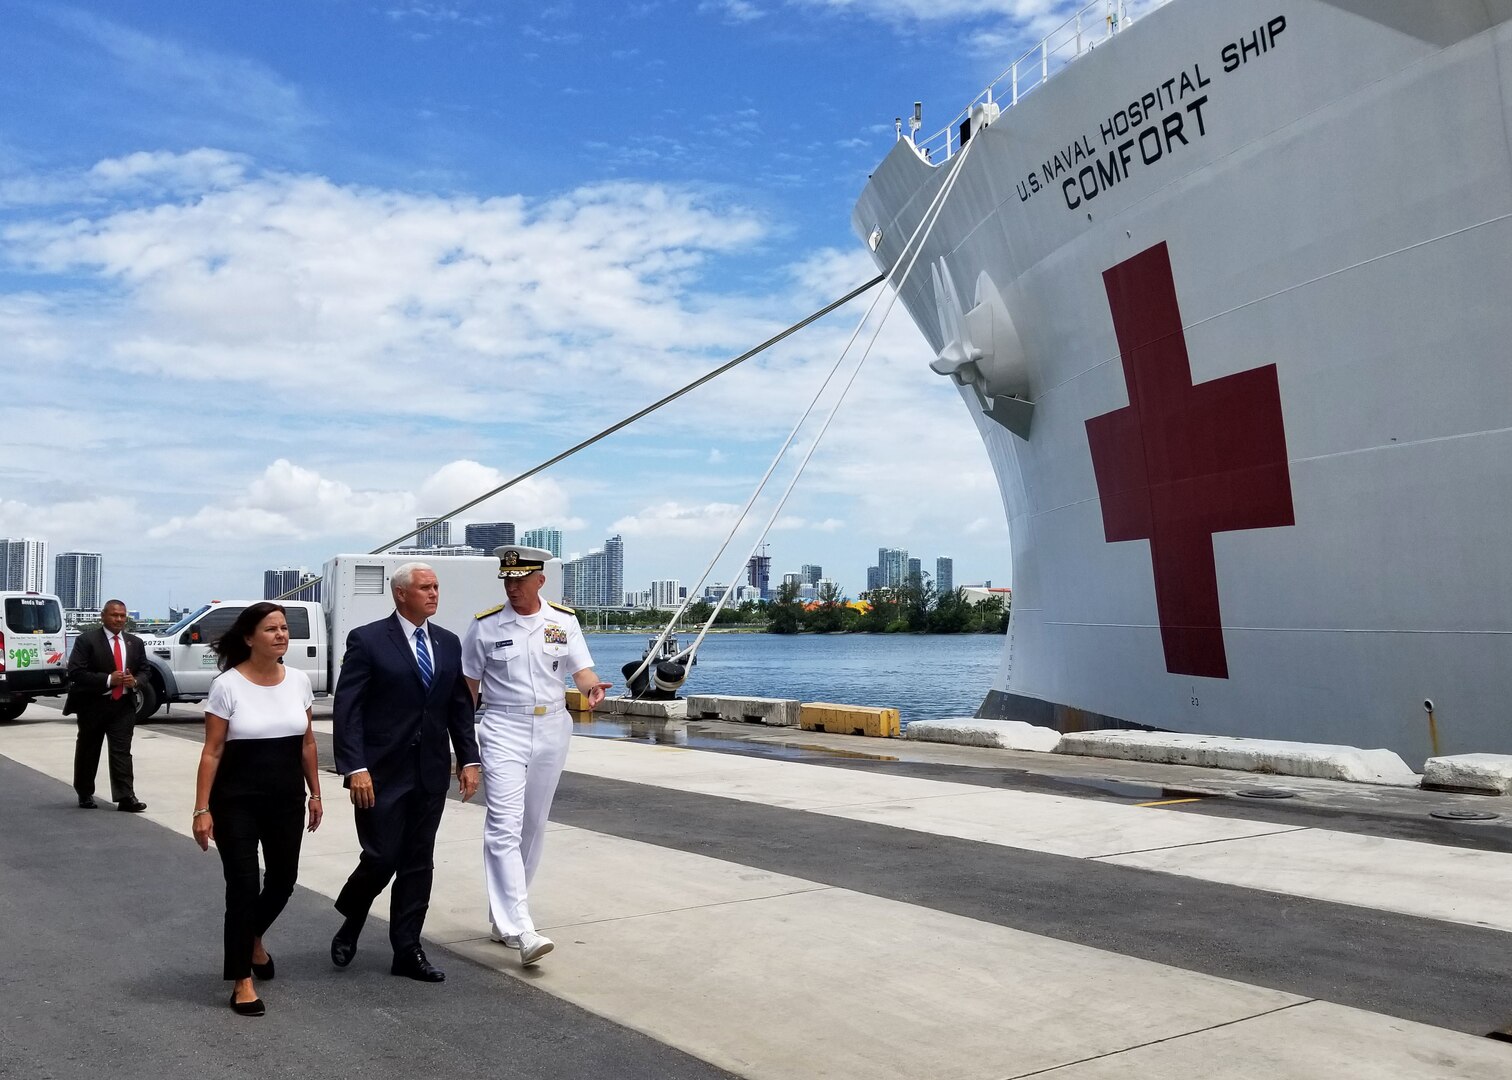 Vice President Mike Pence, second lady Karen Pence, and Adm. Craig S. Faller, commander, U.S. Southern Command, visit the hospital ship USNS Comfort (T-AH 20).